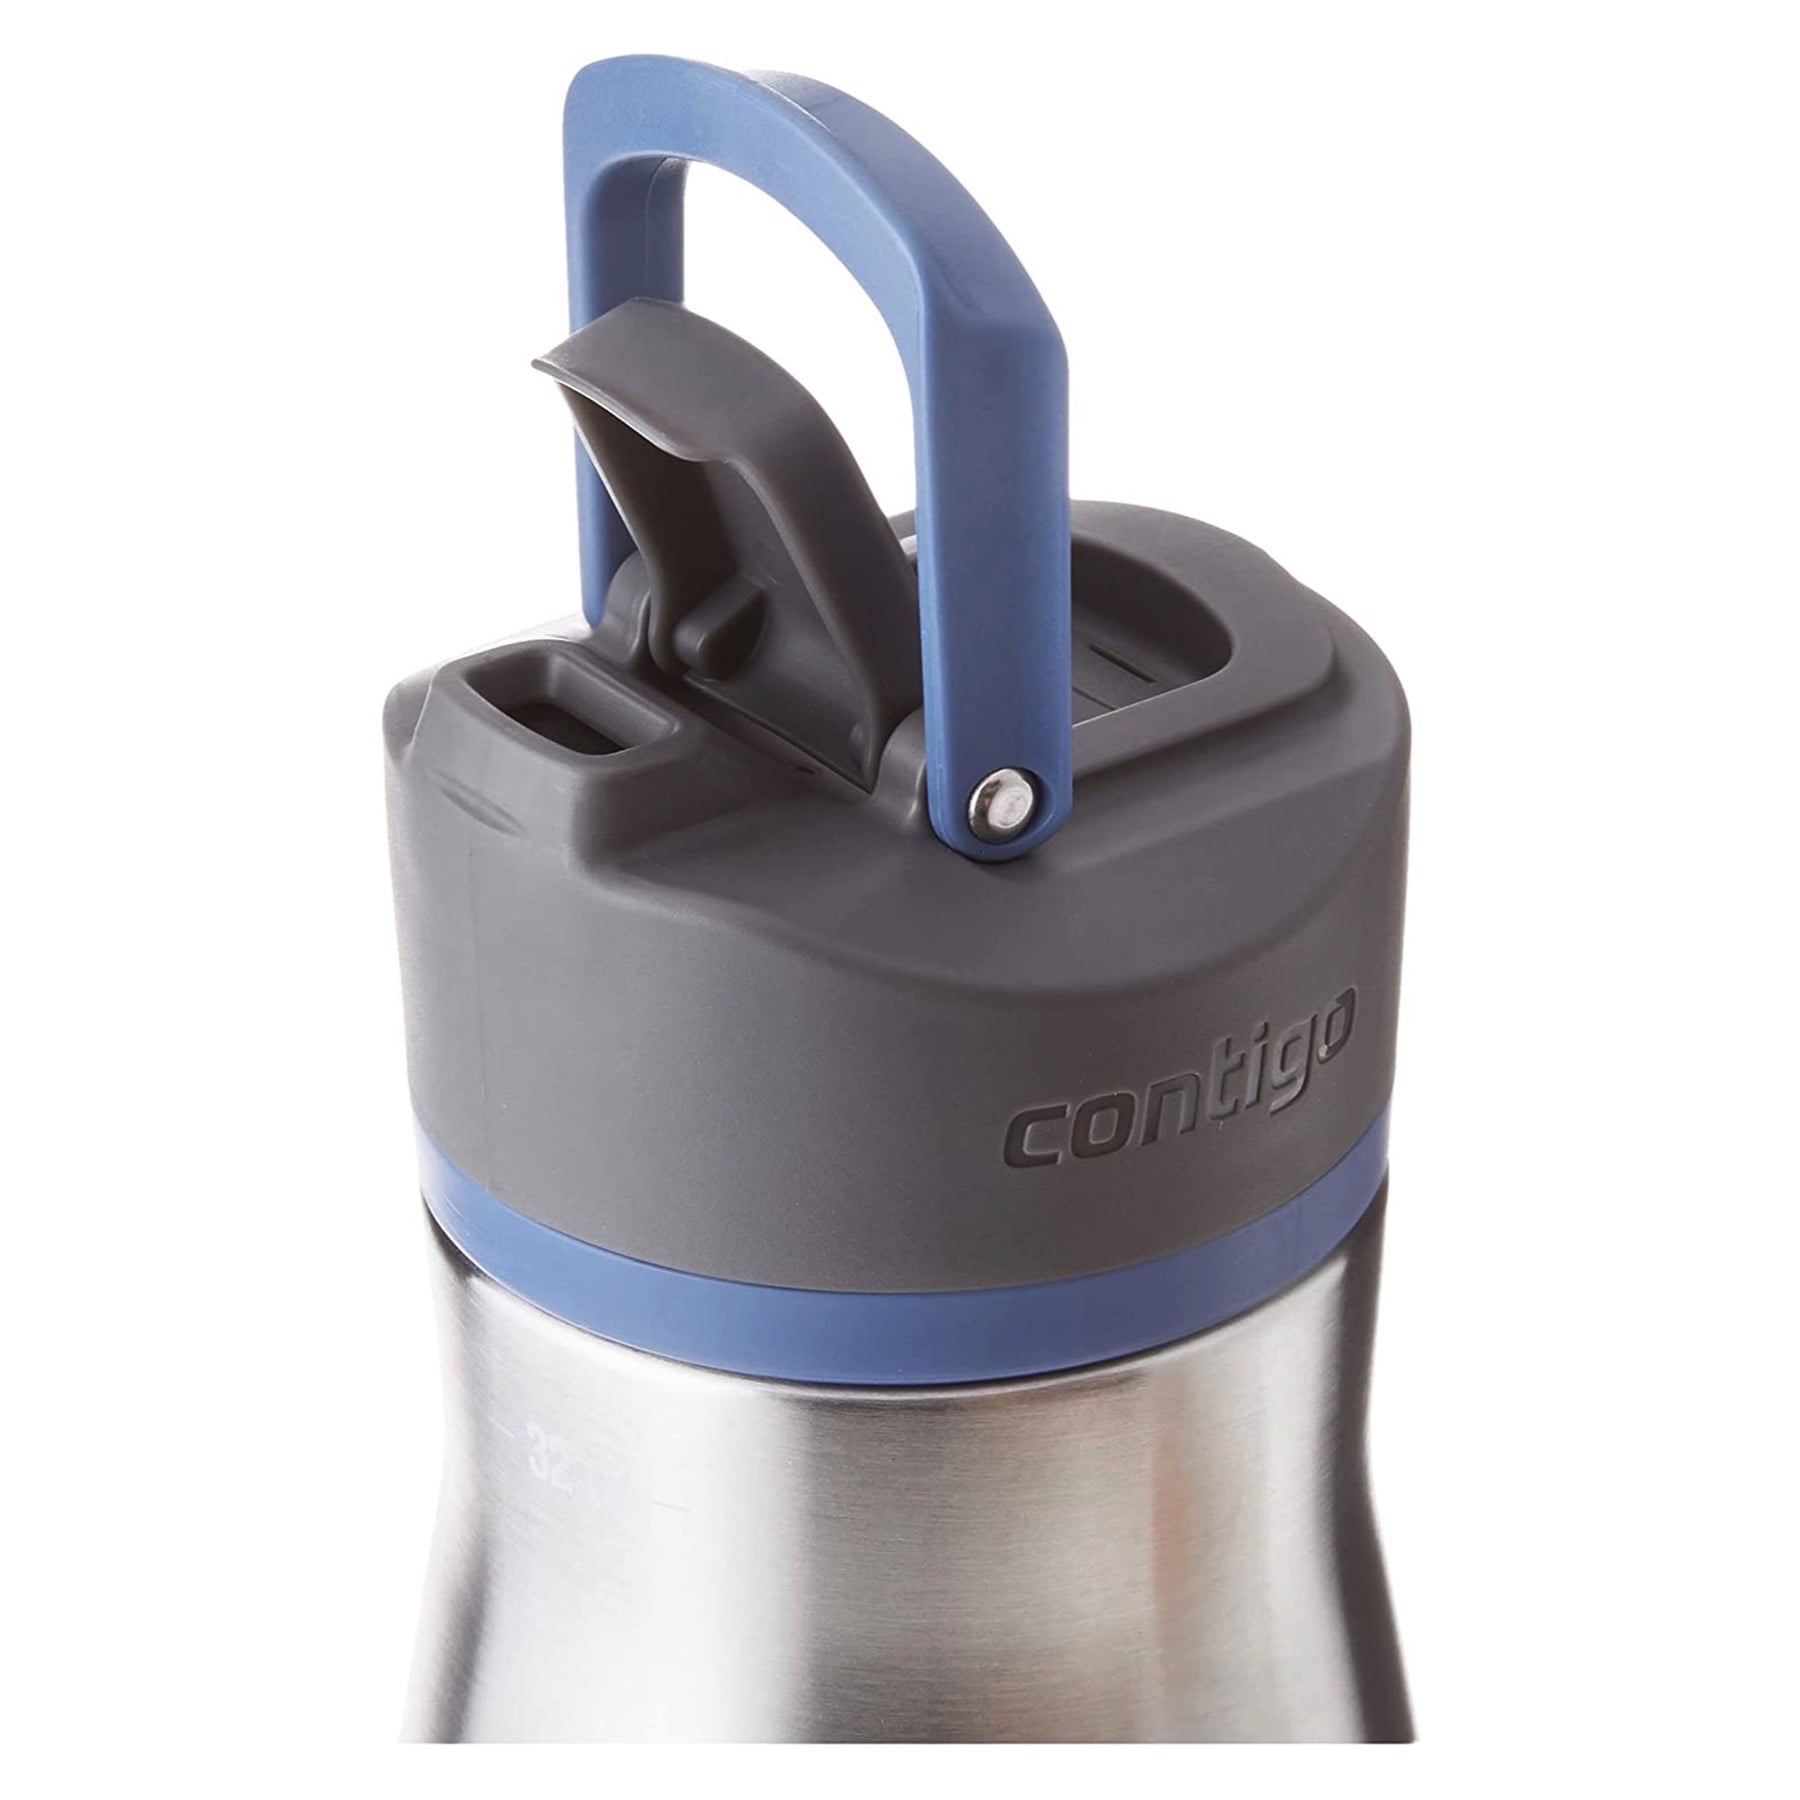 Contigo Cortland Chill 2.0 Water Bottle with AUTOSEAL Lid